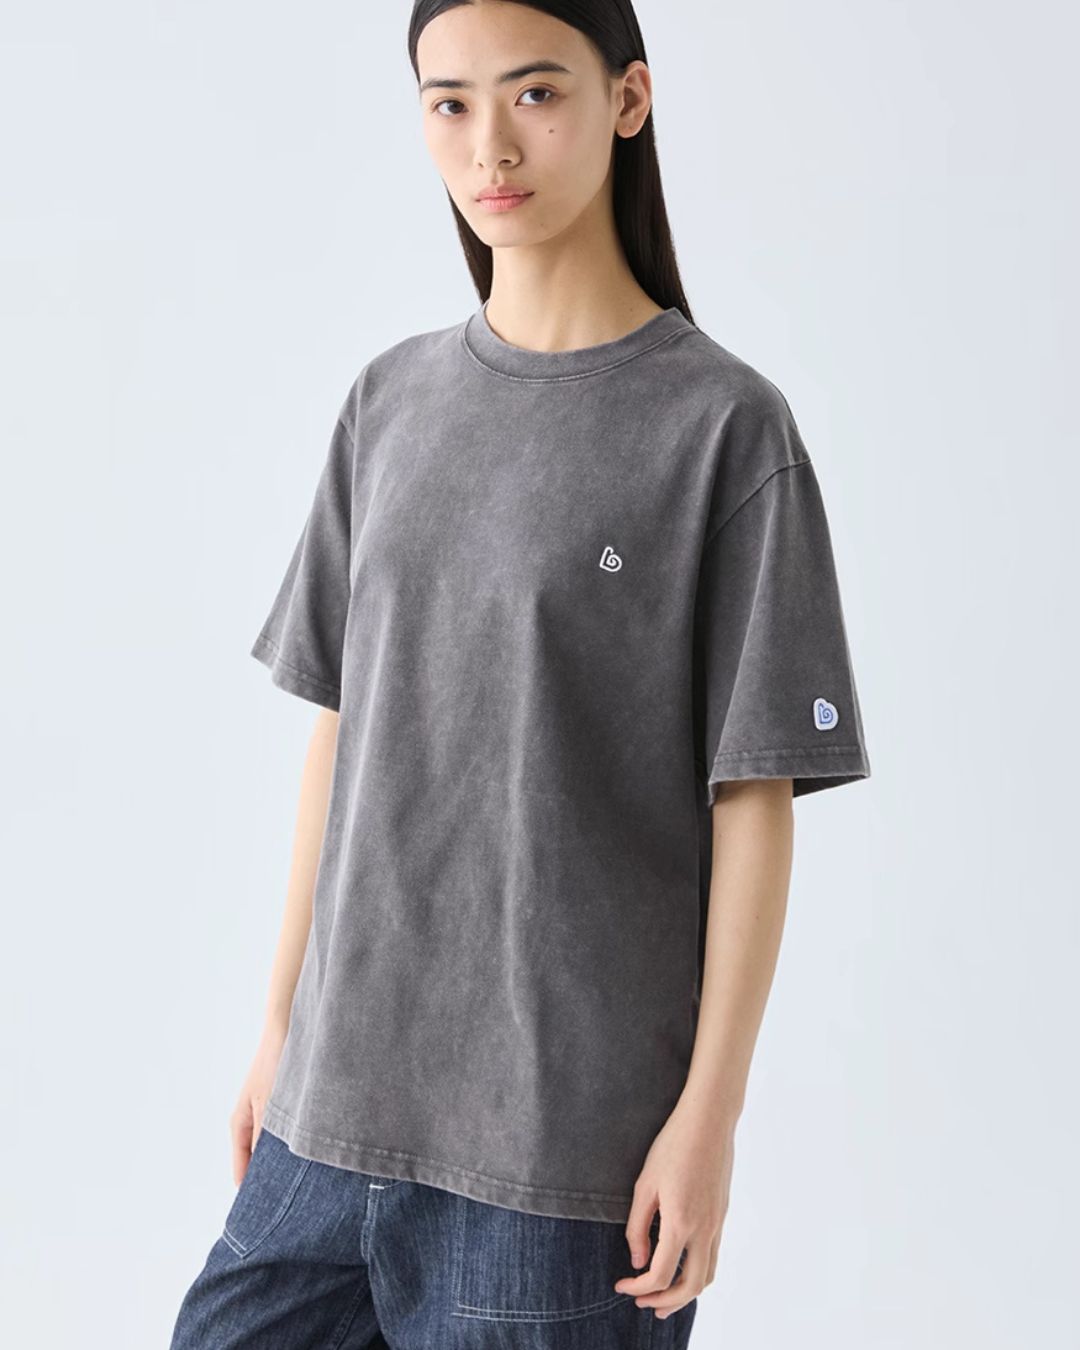 Washed Color T-shirt　ST088